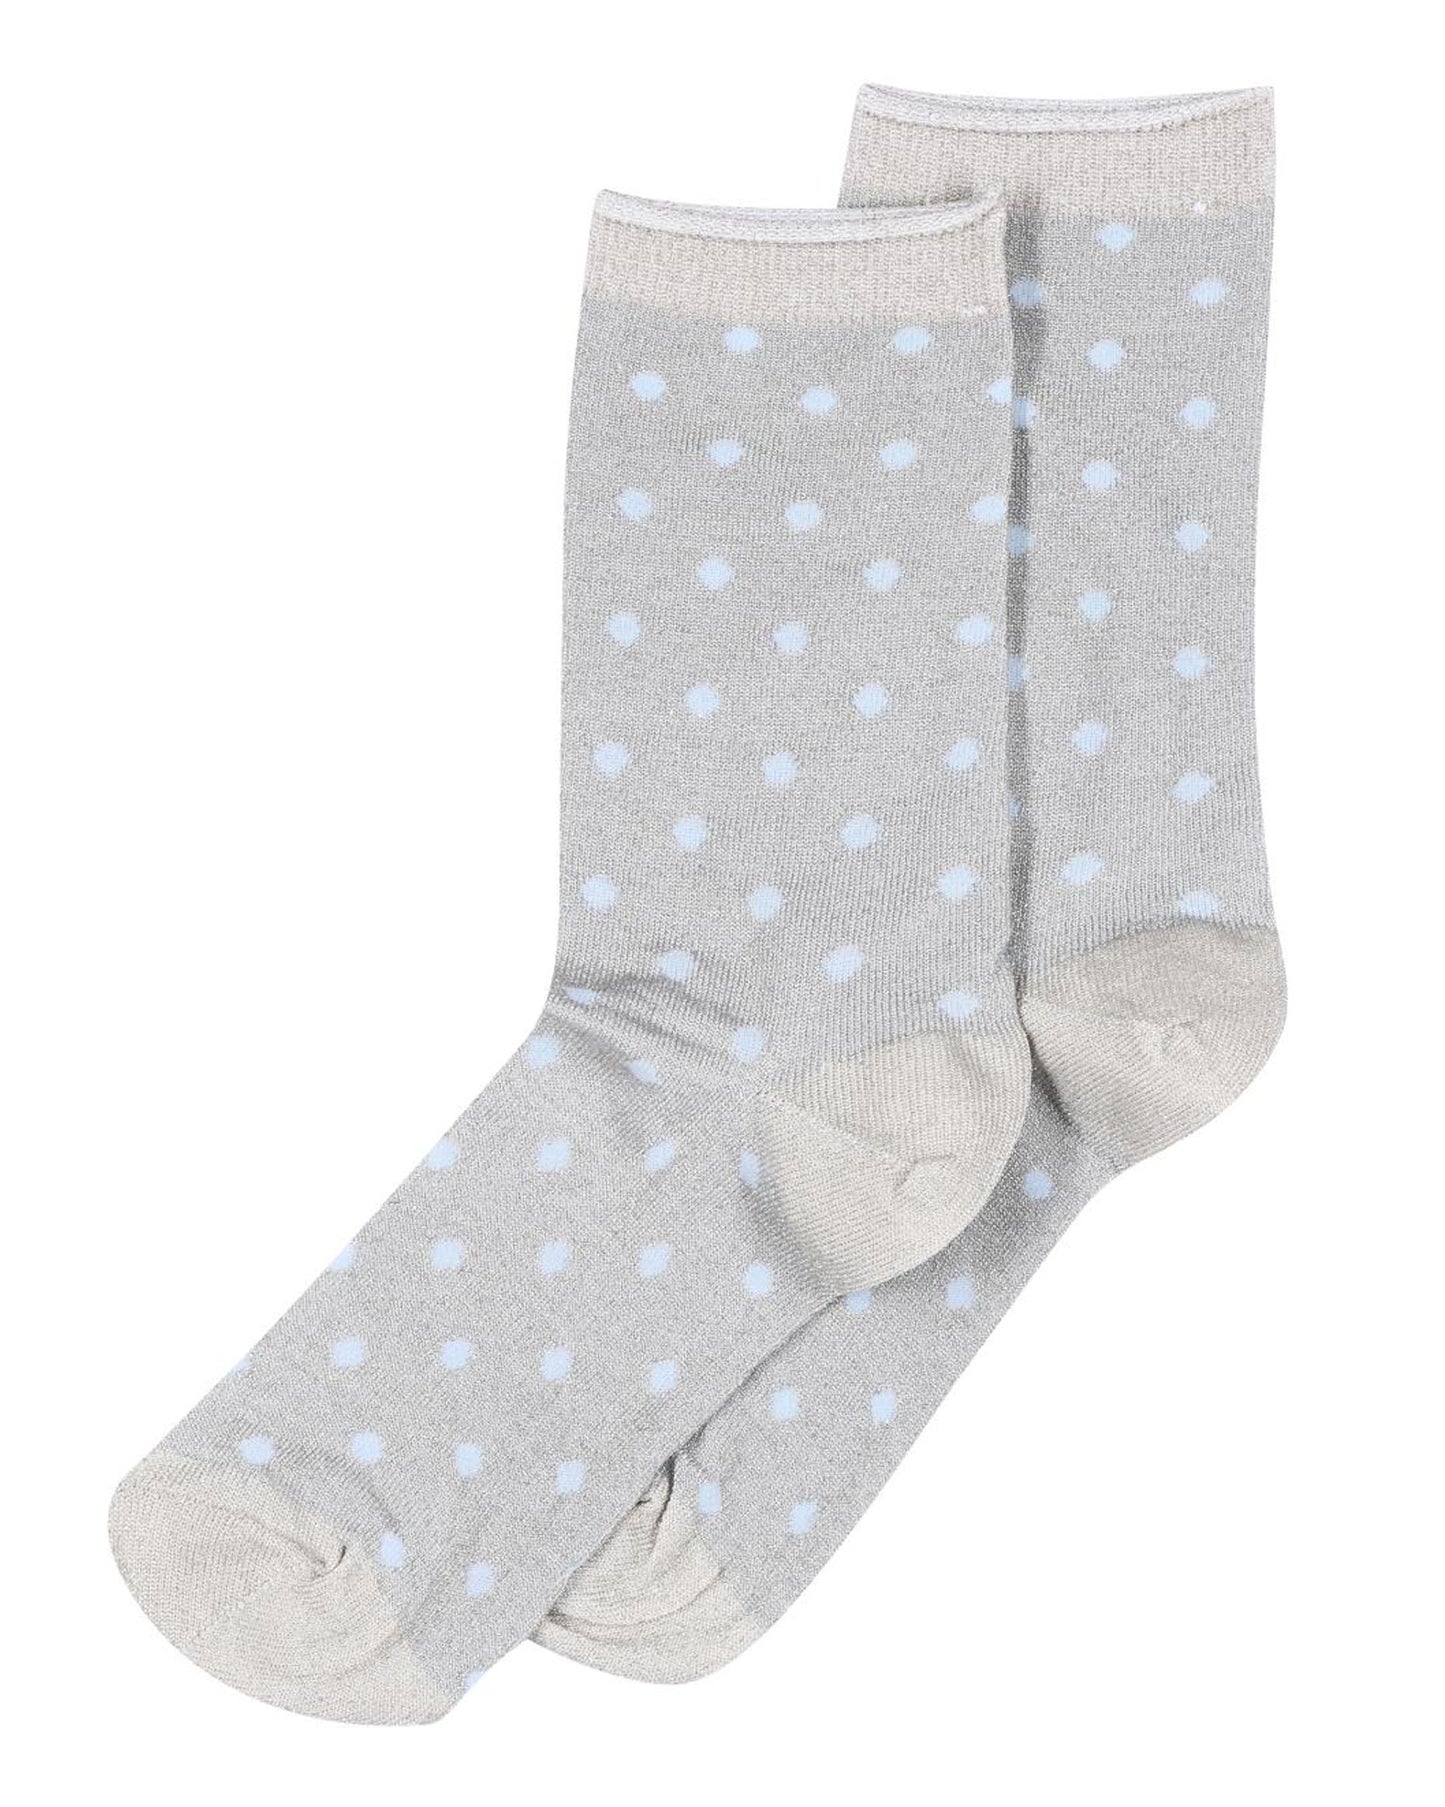 MP Denmark Donna Glitter Socks - Light silver sparkly lamé fashion ankle socks with an all over pale blue polka dot pattern with silver cuff, heal and toe.